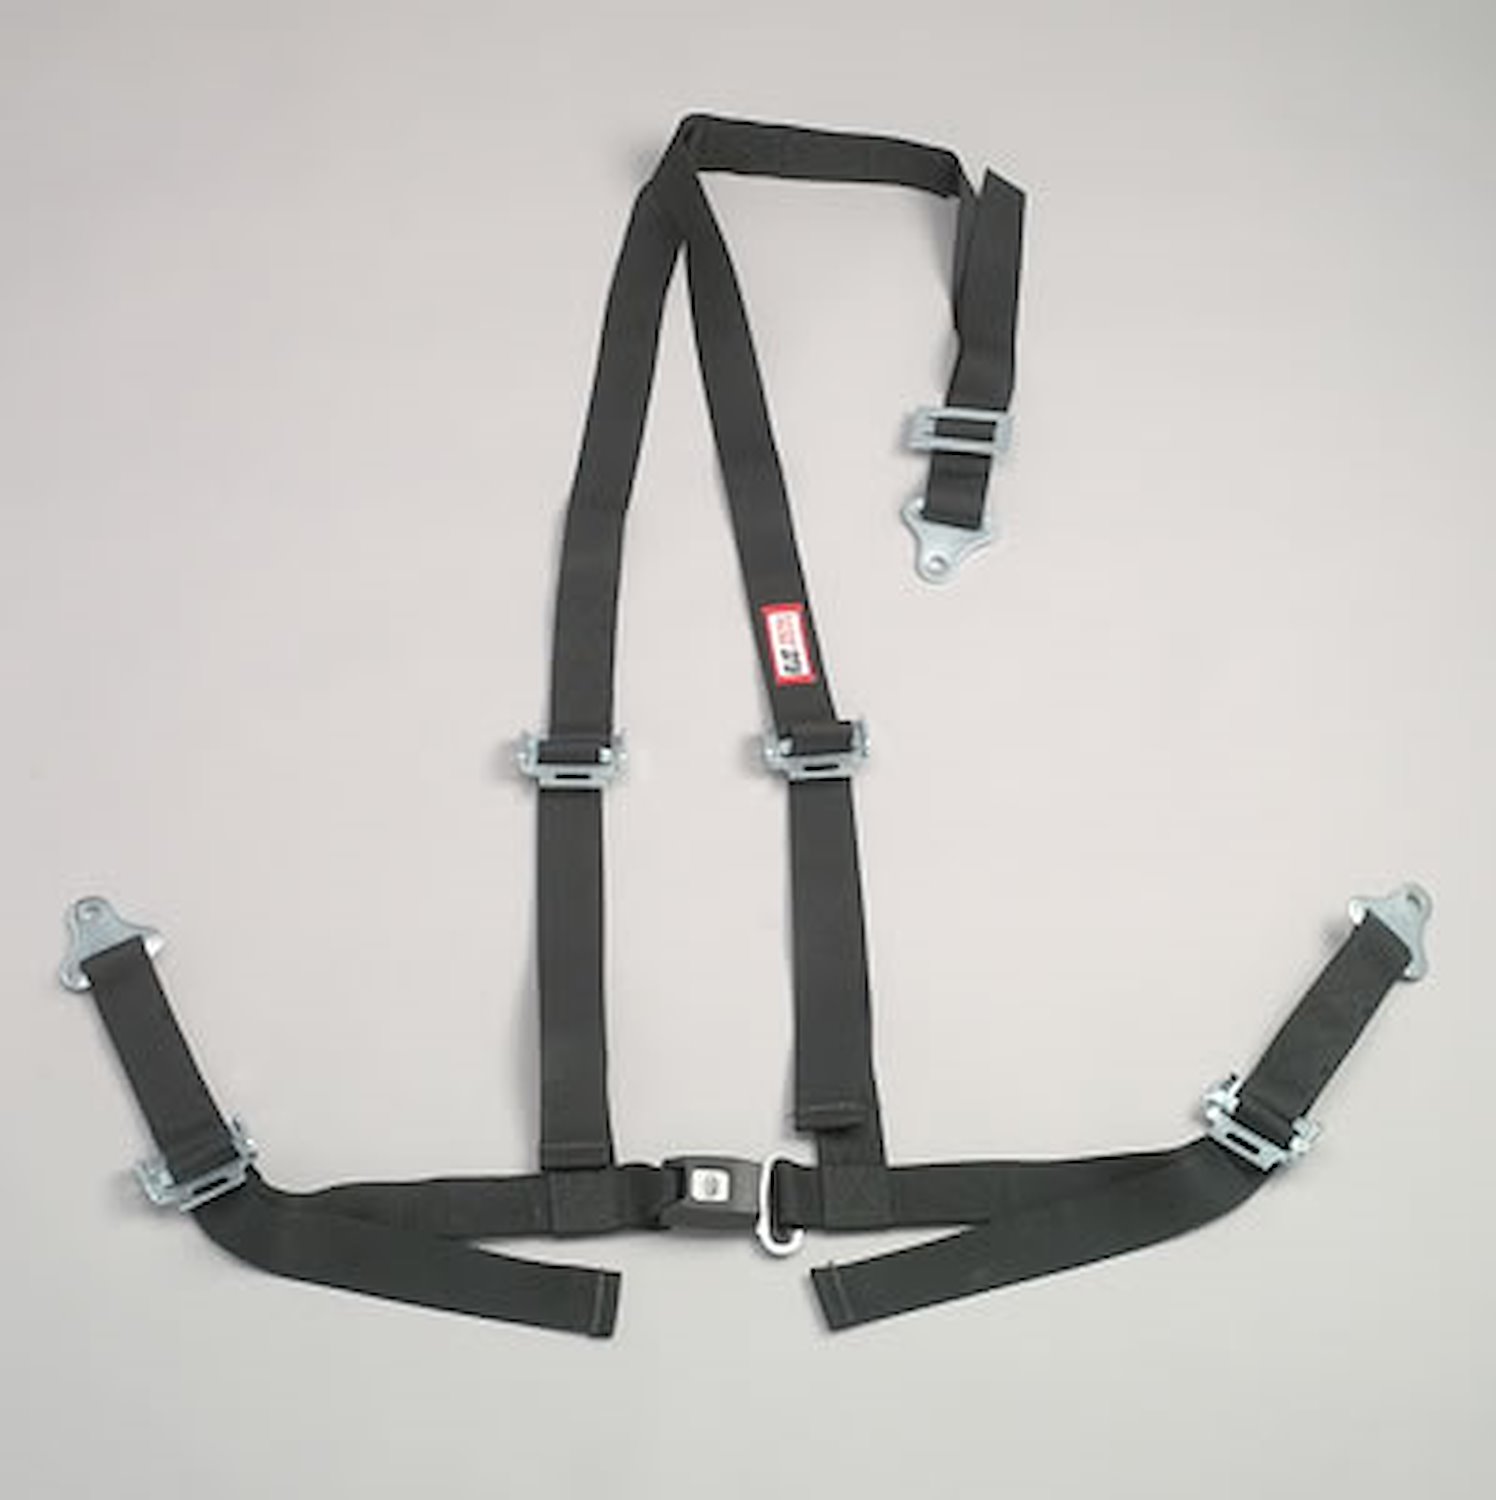 NON-SFI B&T HARNESS 2 PULL DOWN Lap Belt 2 S. H. Individual ROLL BAR Mount ALL WRAP ENDS YELLOW